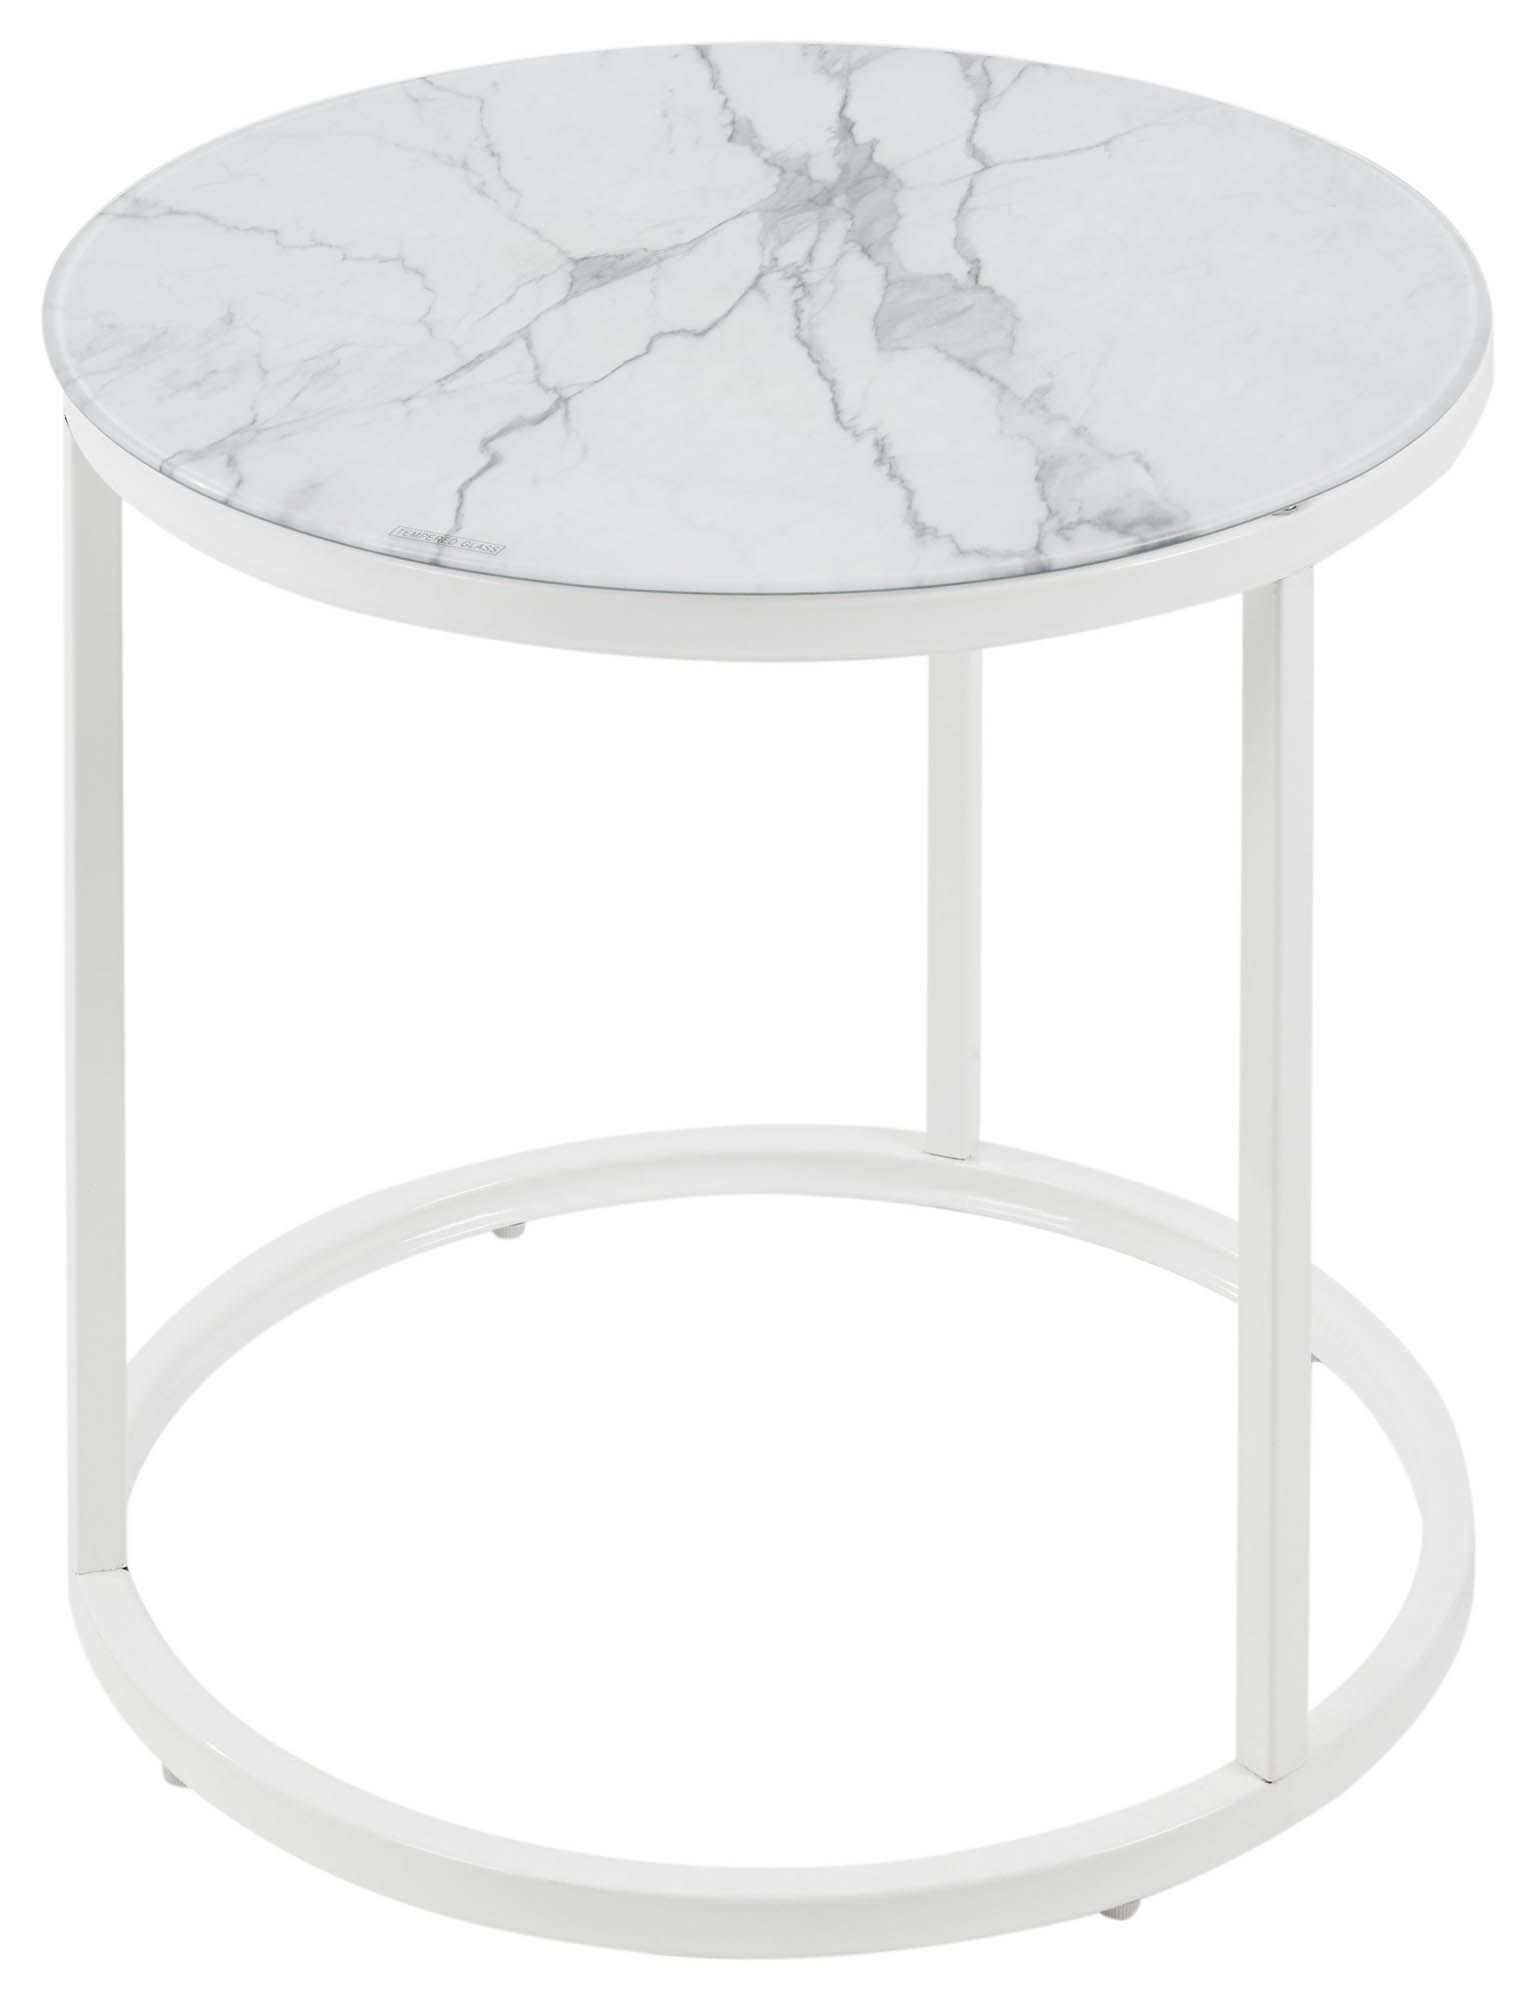 Table d'appoint FARUM